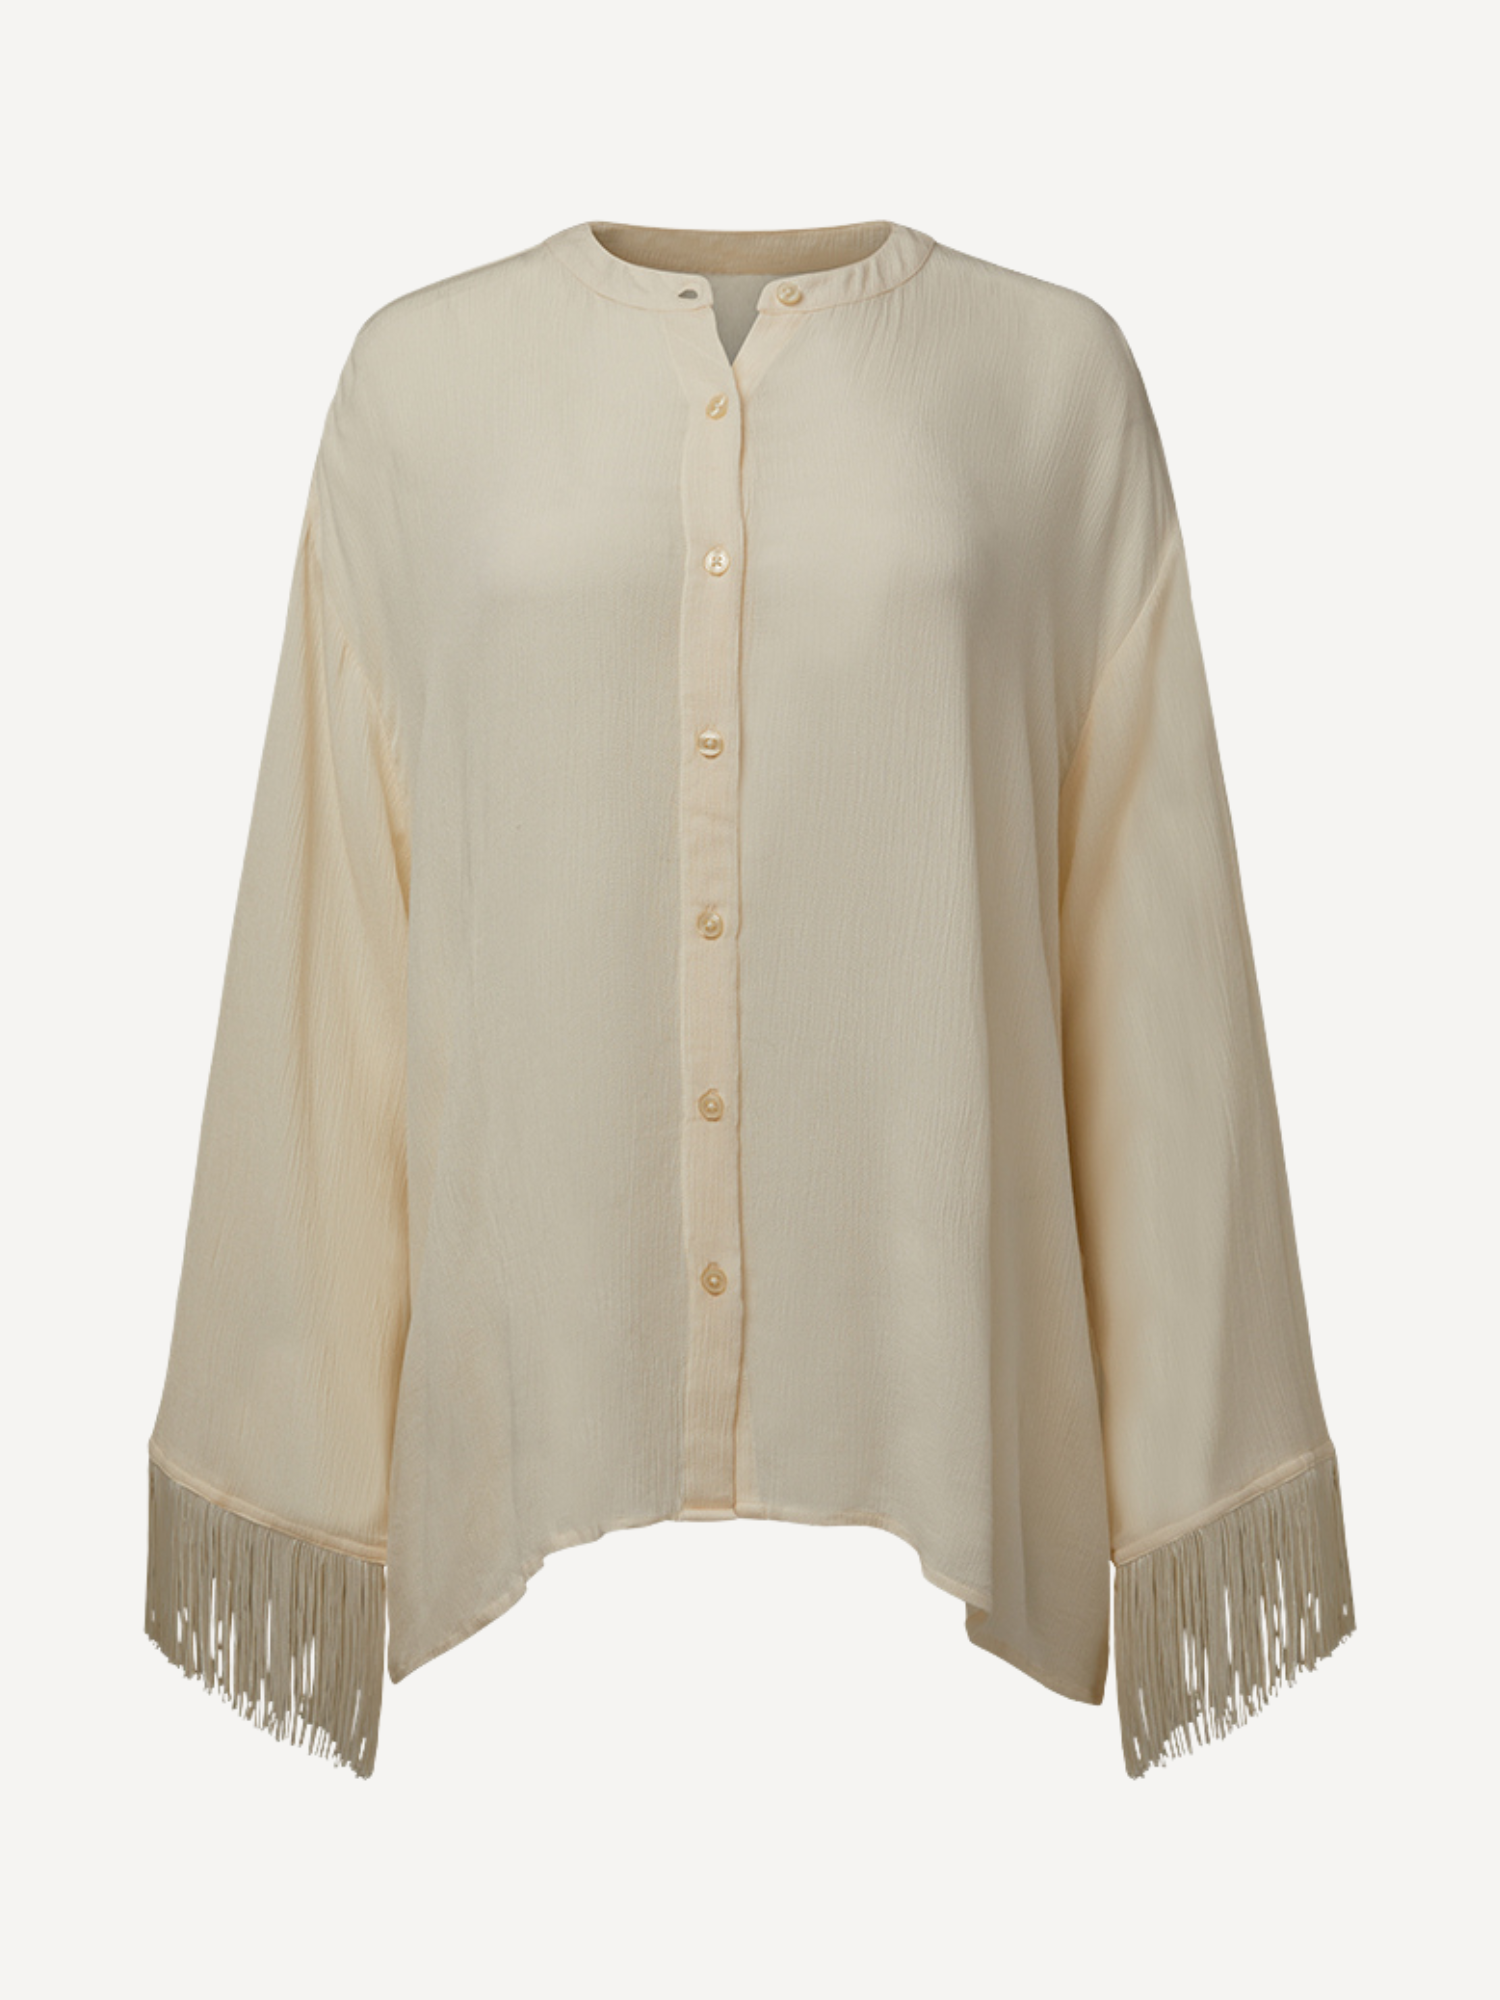 Fringe Button Up Top